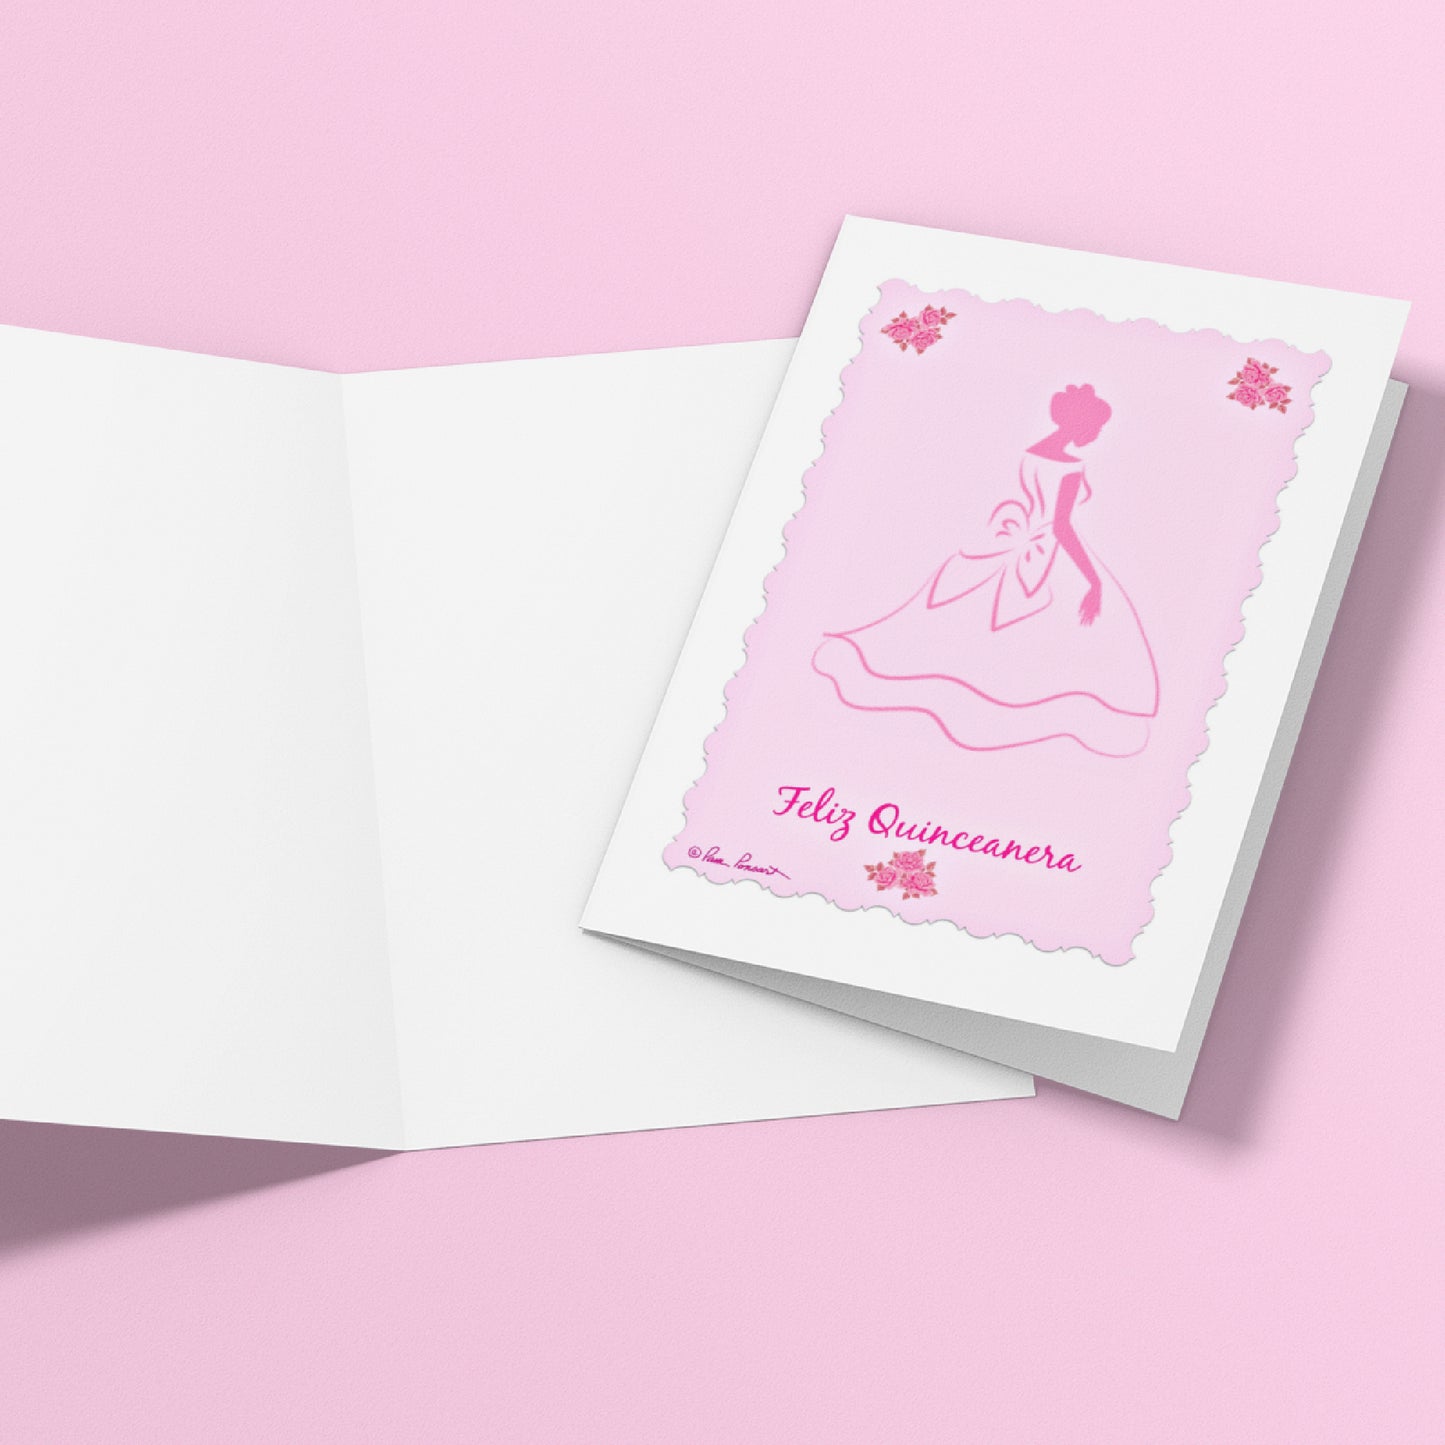 Mock up of 2 Latina Birthday Cards. The card on the left features the blank inside; the card on the right features the front view